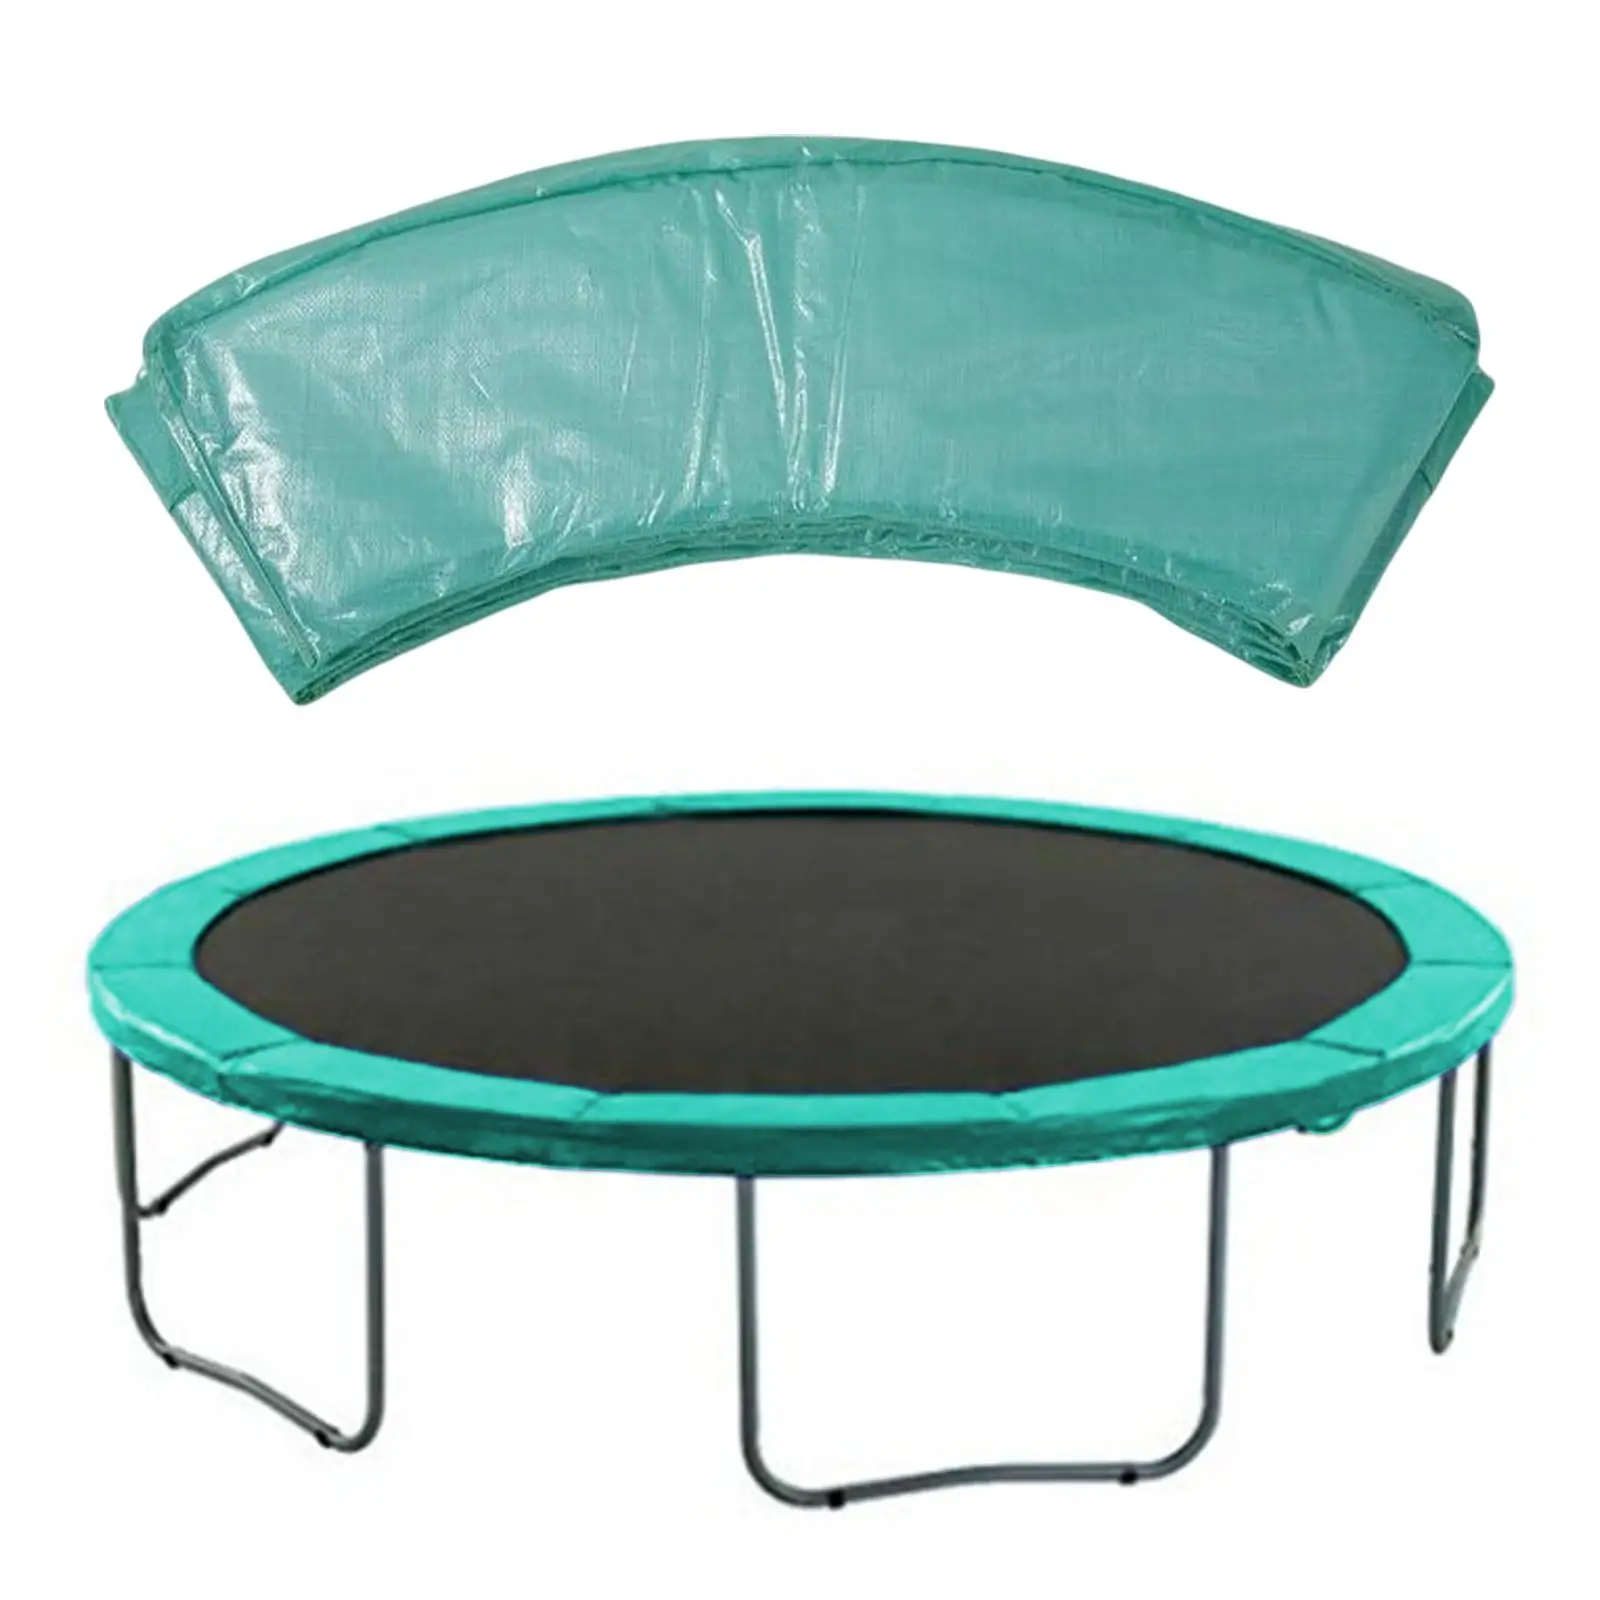 Spring protection cover trampoline edge cover for trampoline frame